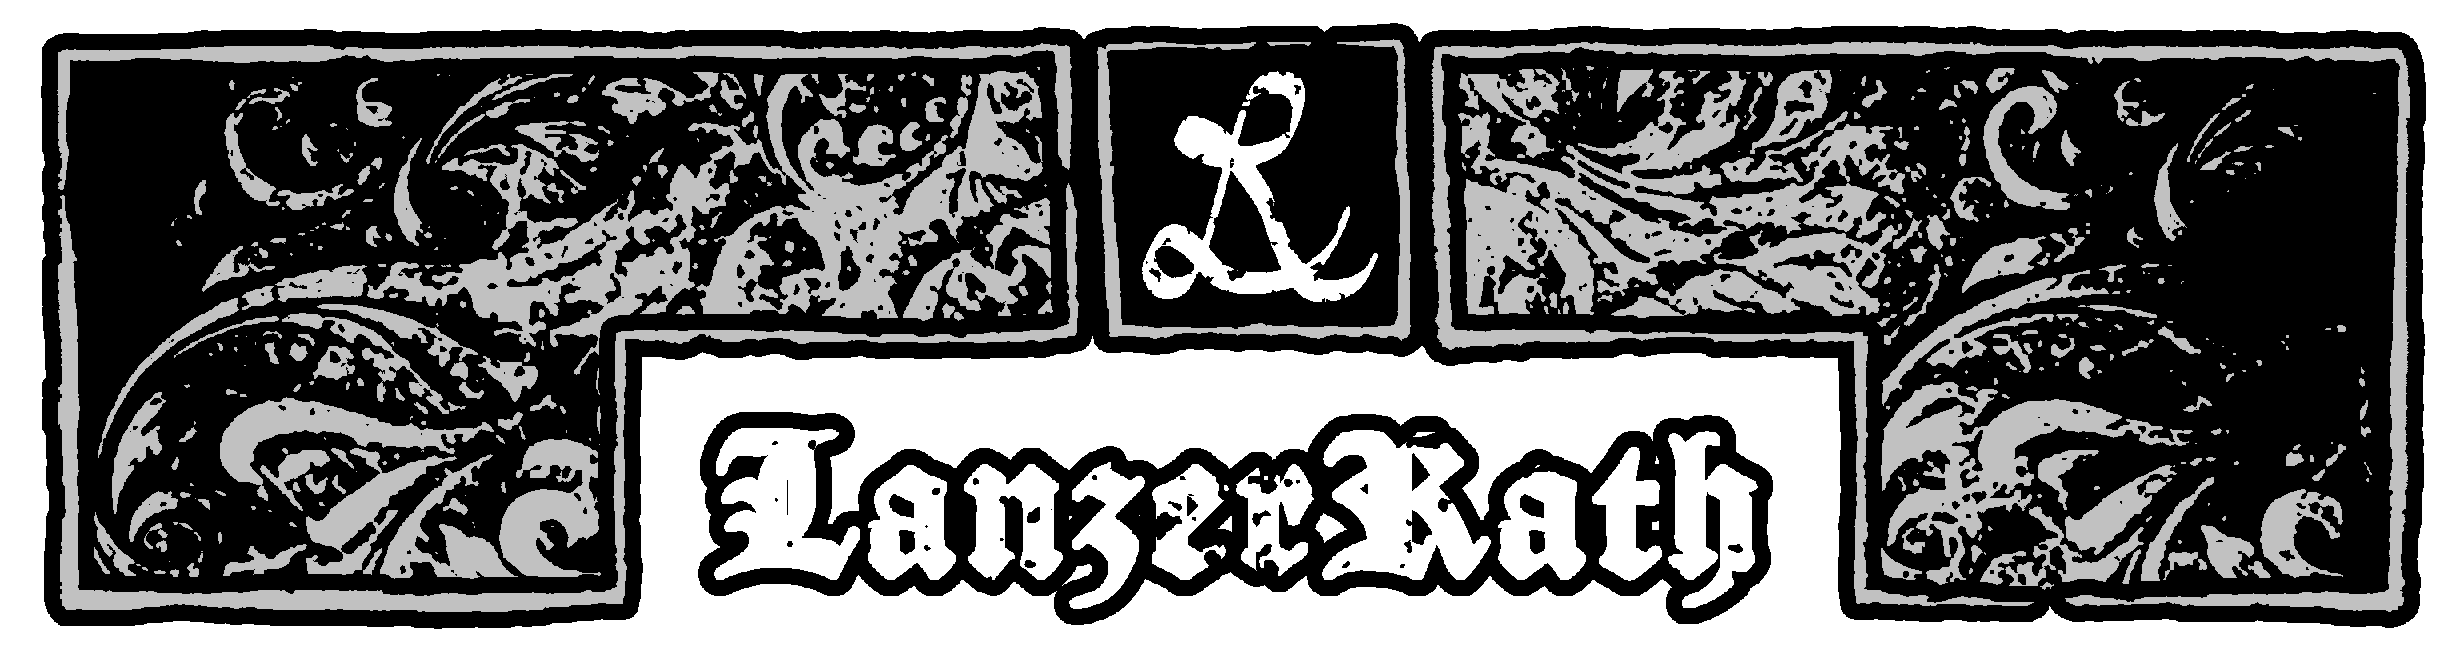 Website banner image, it reads the Michigan black metal band's name LanzerRath